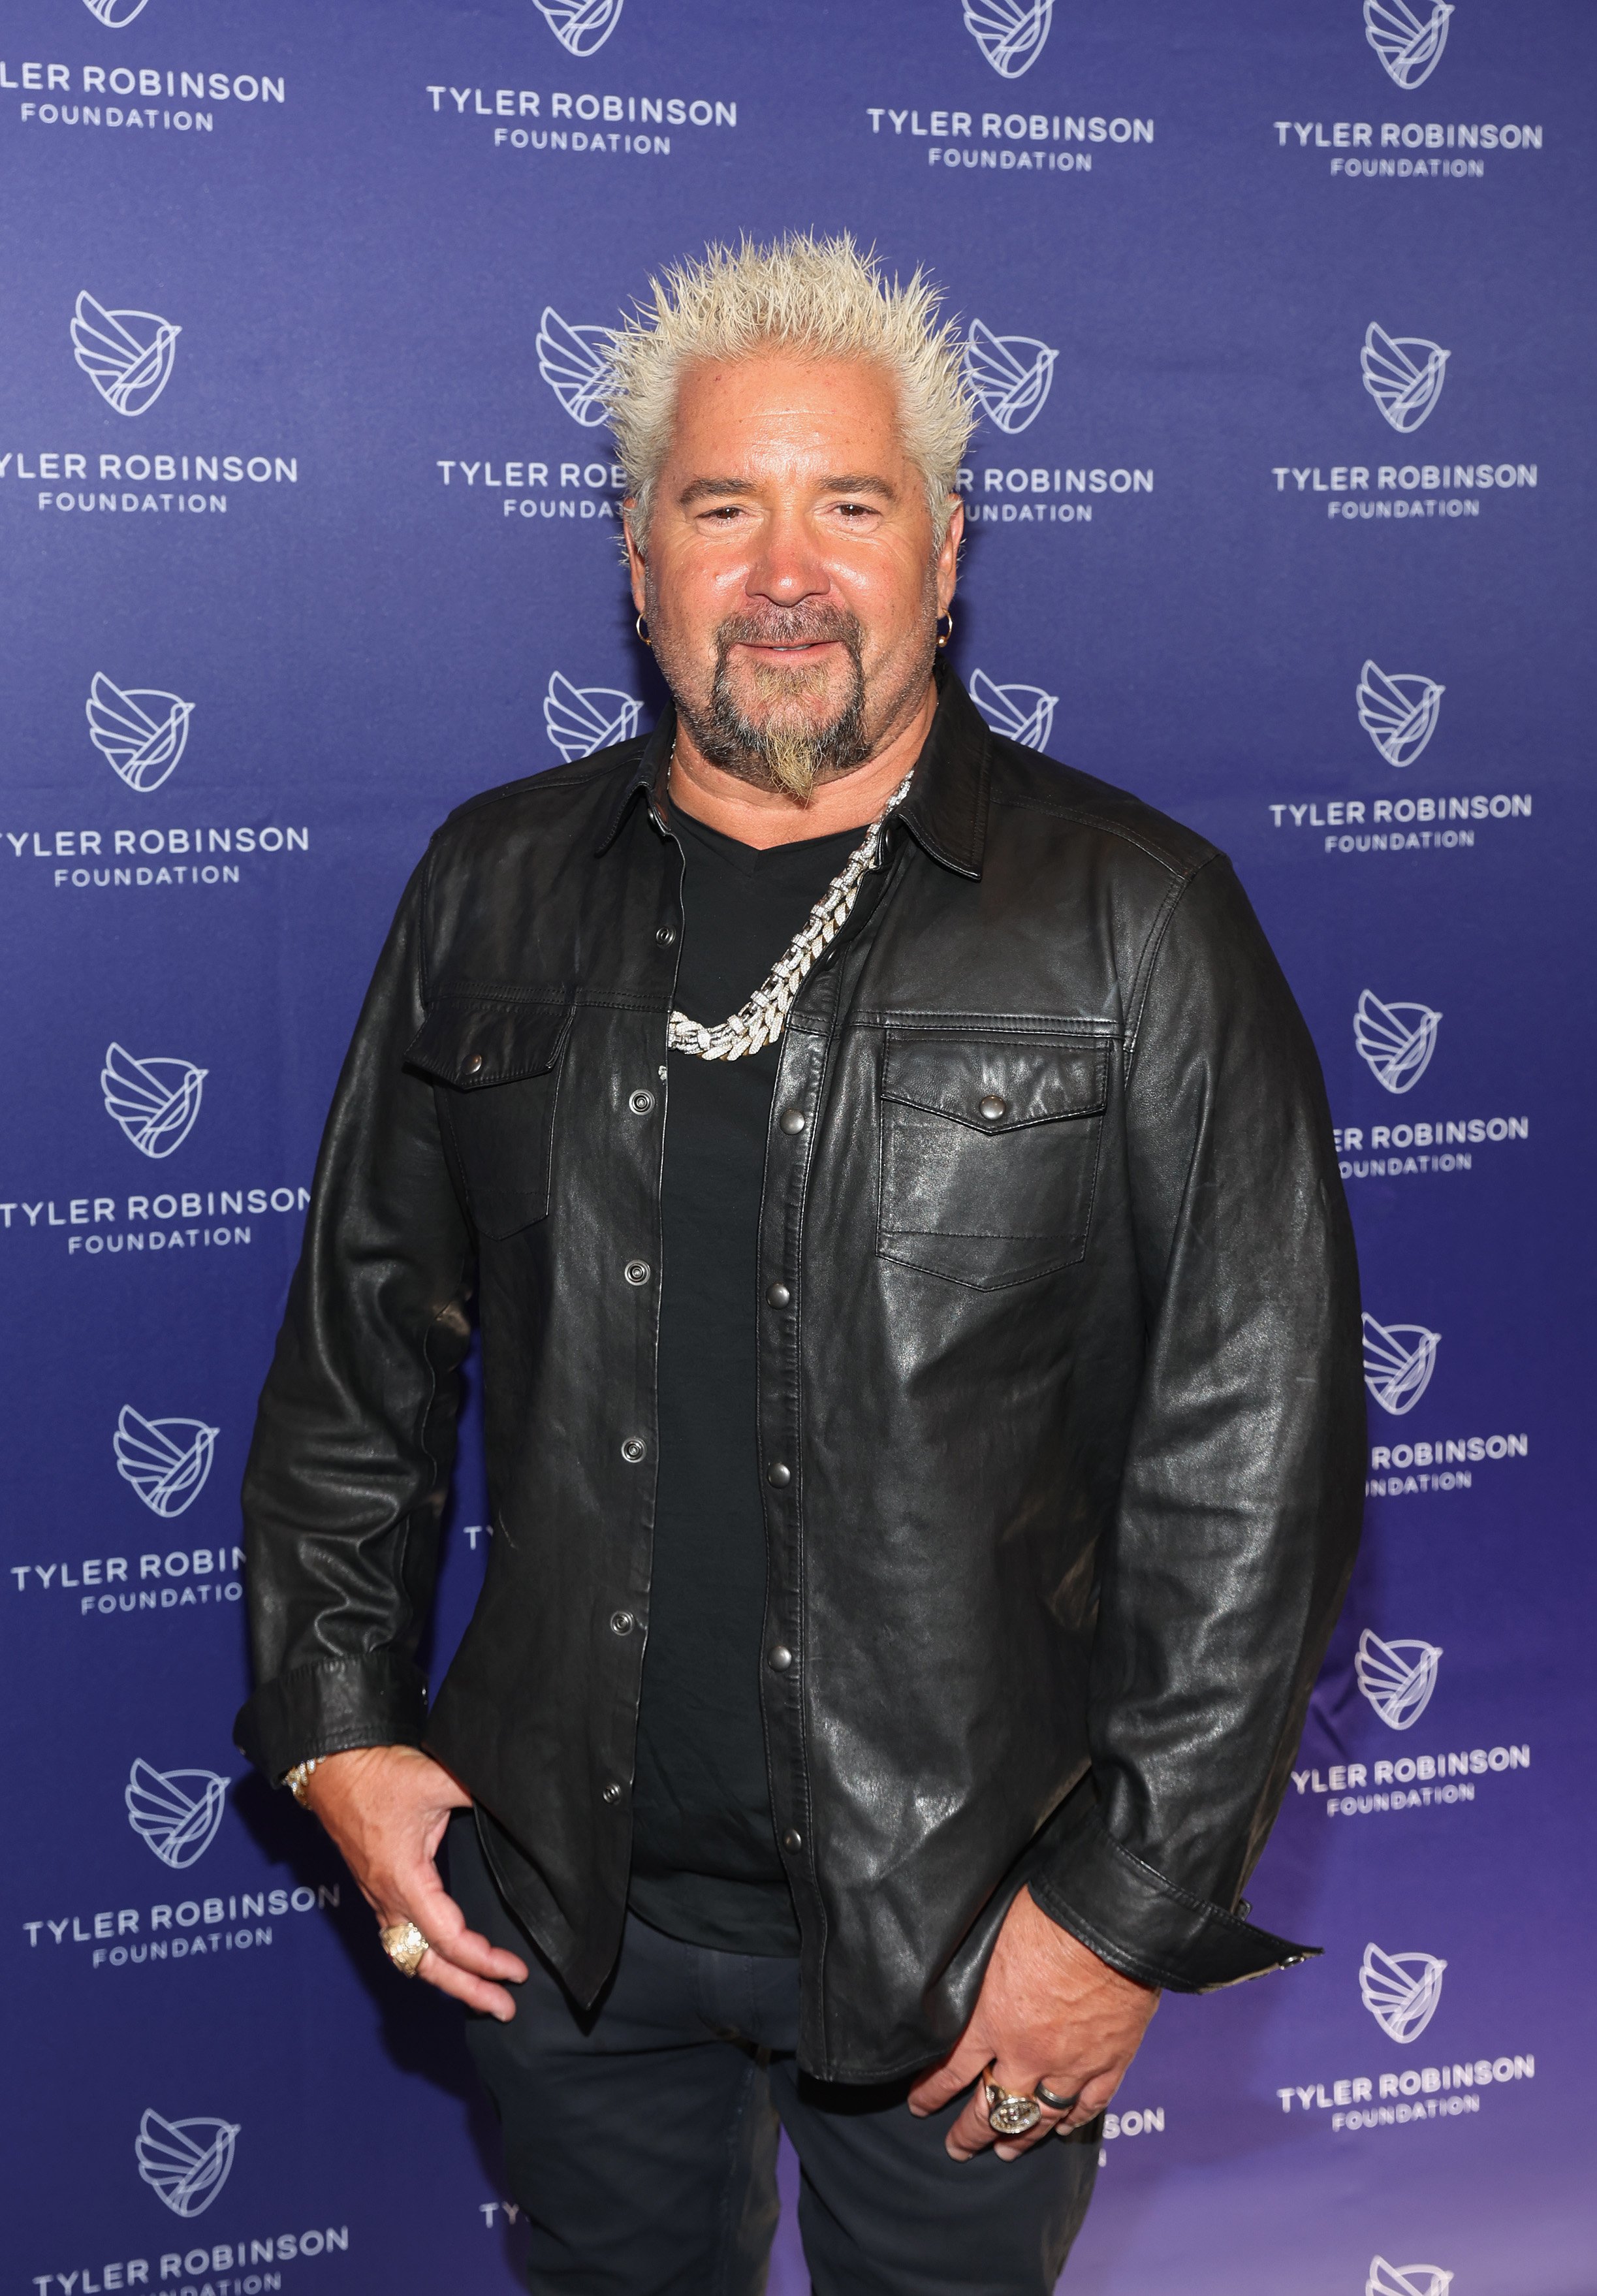 Guy Fieri at Imagine Dragons' Eighth Annual Tyler Robinson Foundation Rise Up Gala on September 23, 2022, in Las Vegas, Nevada | Source: Getty Images